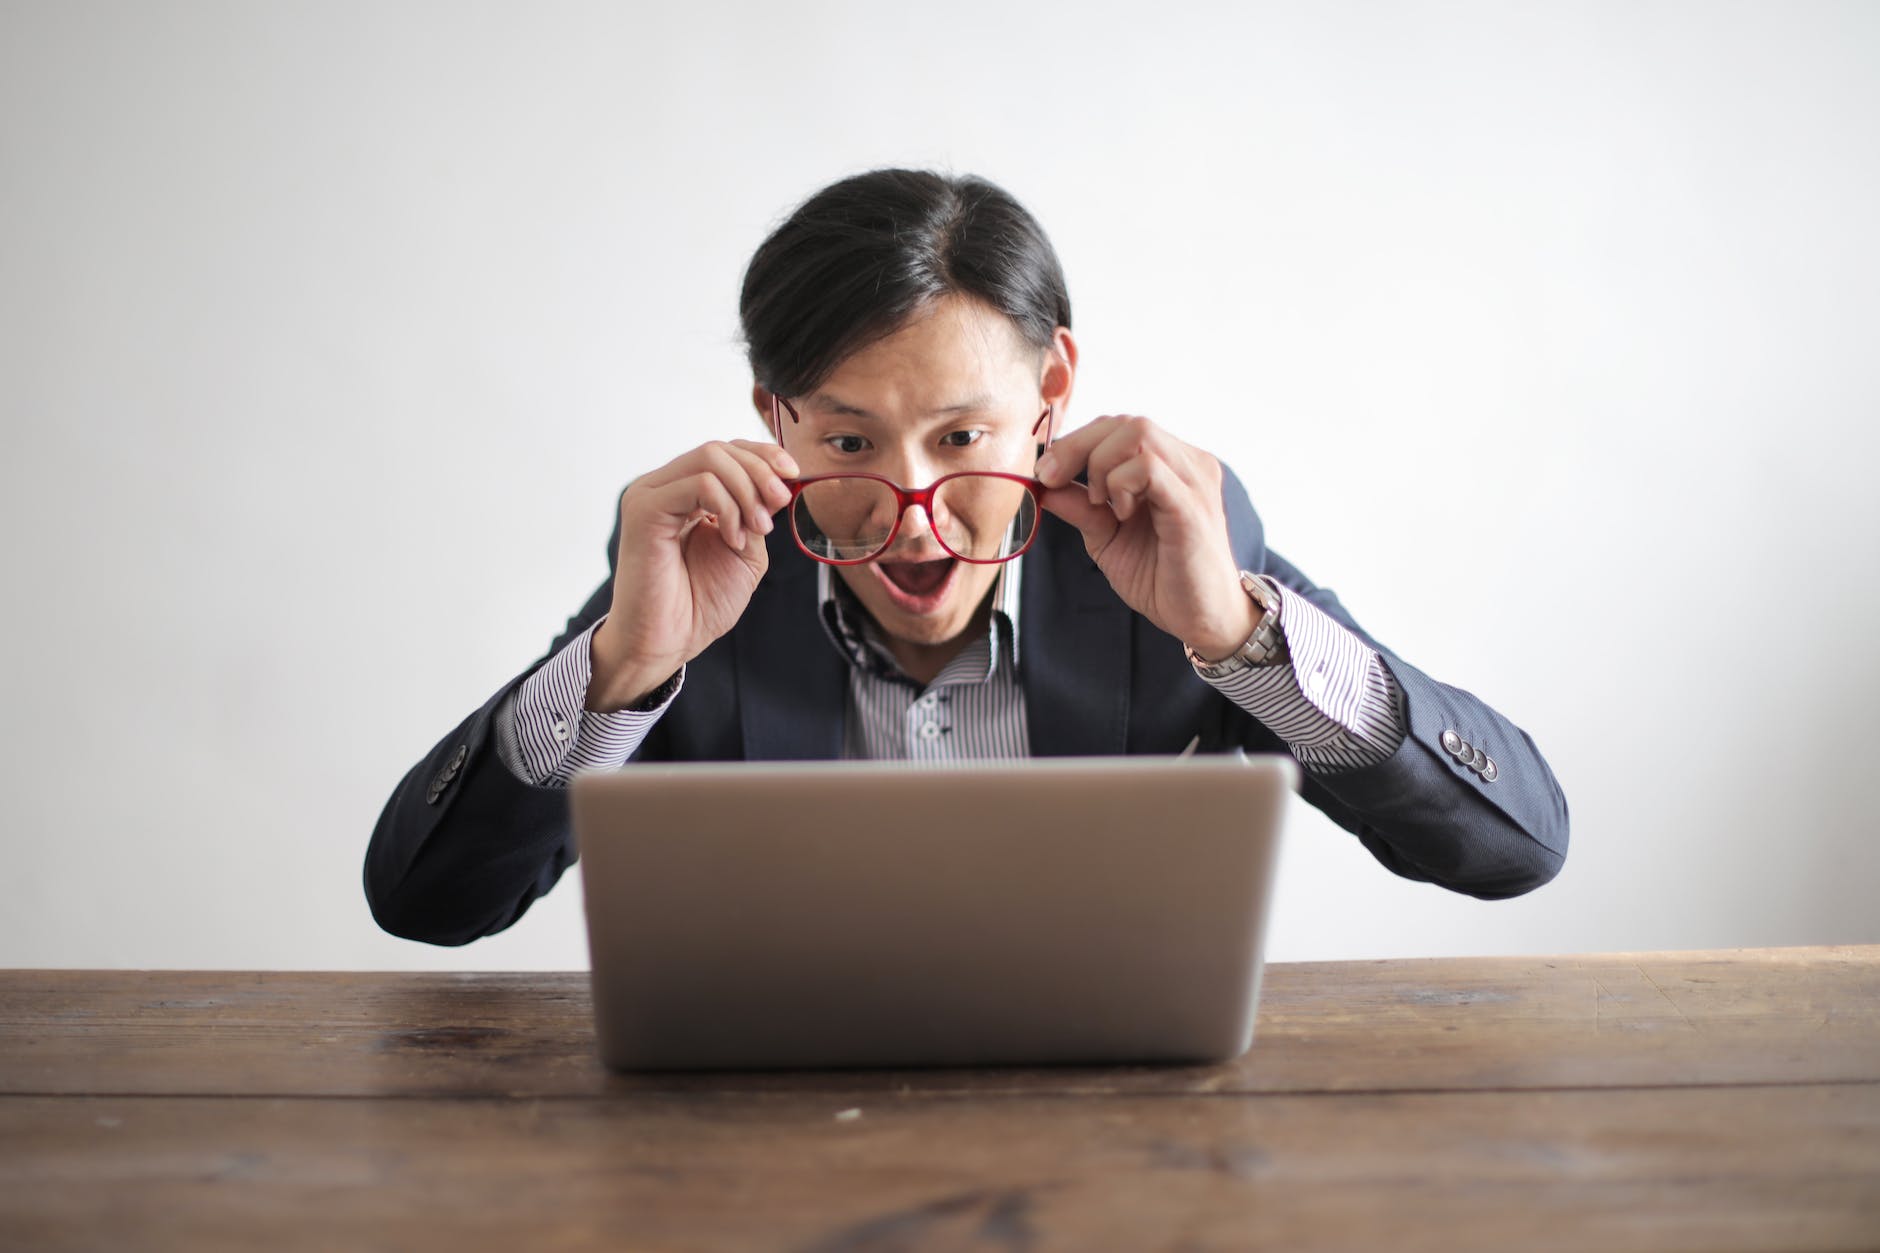 Photo of man shocked by news story by Andrea Piacquadio on Pexels.com